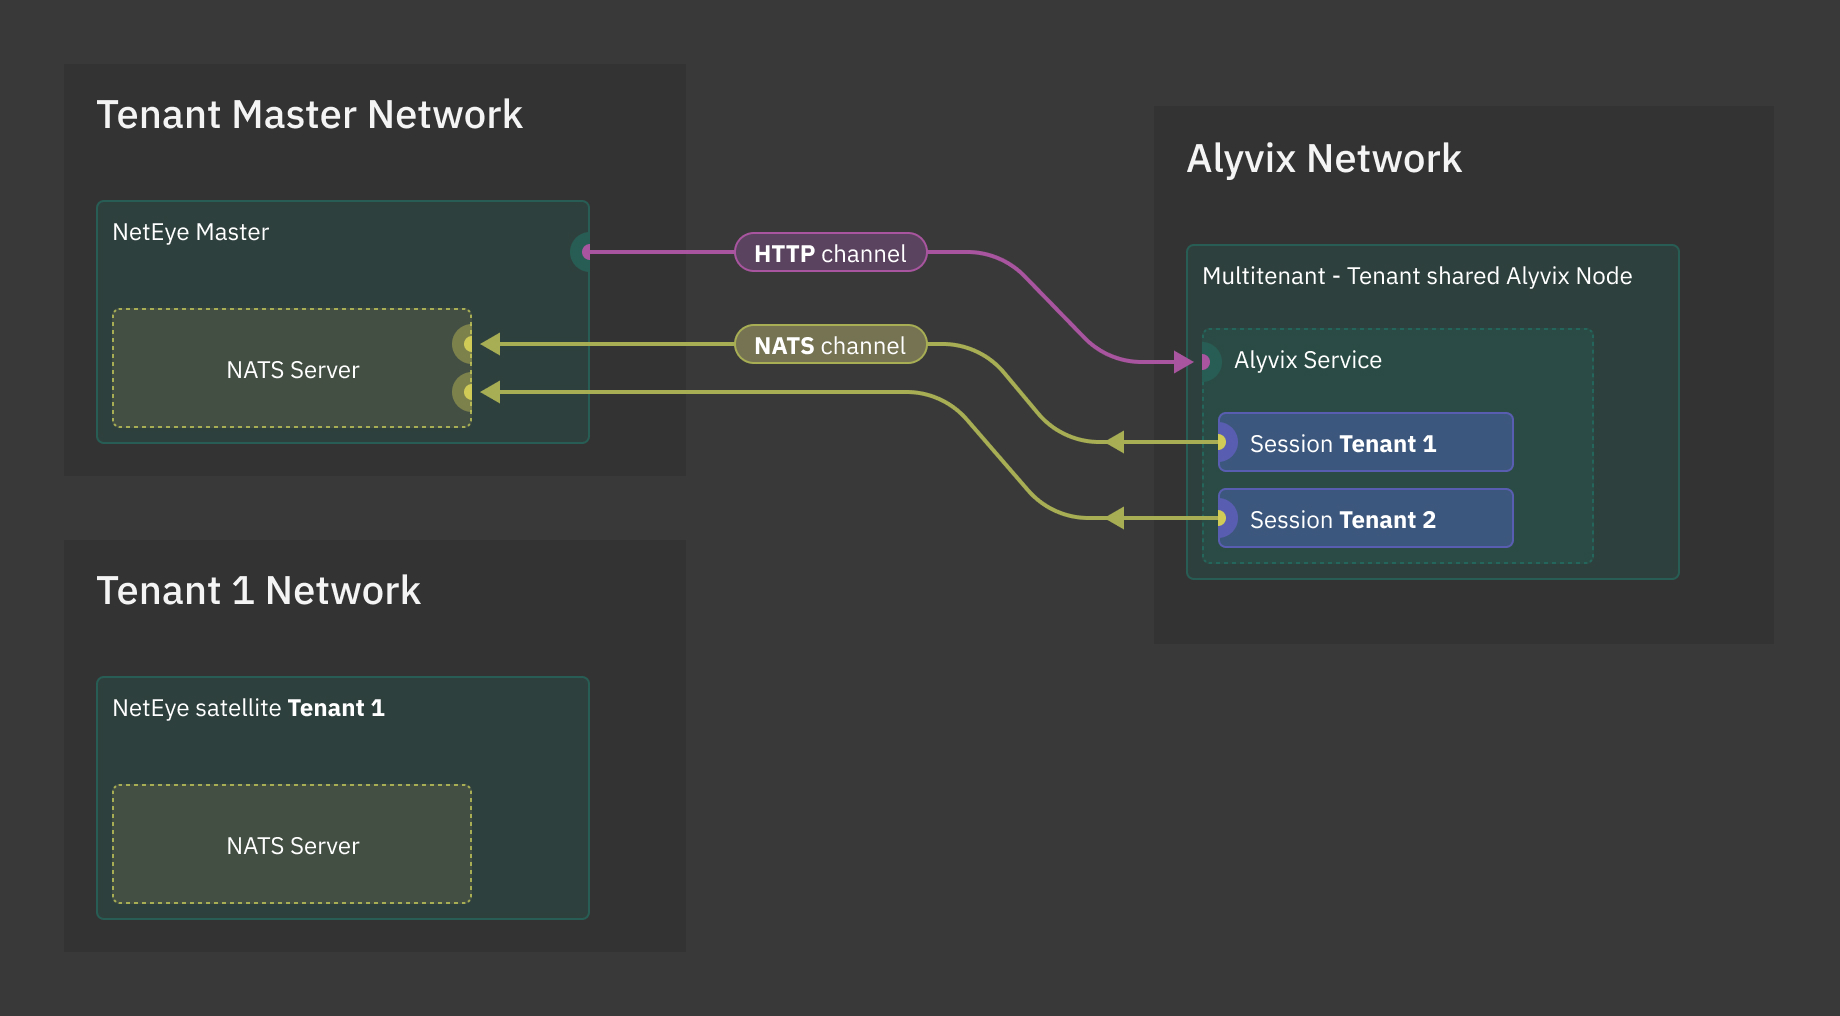 Direct communication between the Alyvix node and the |ne| Master